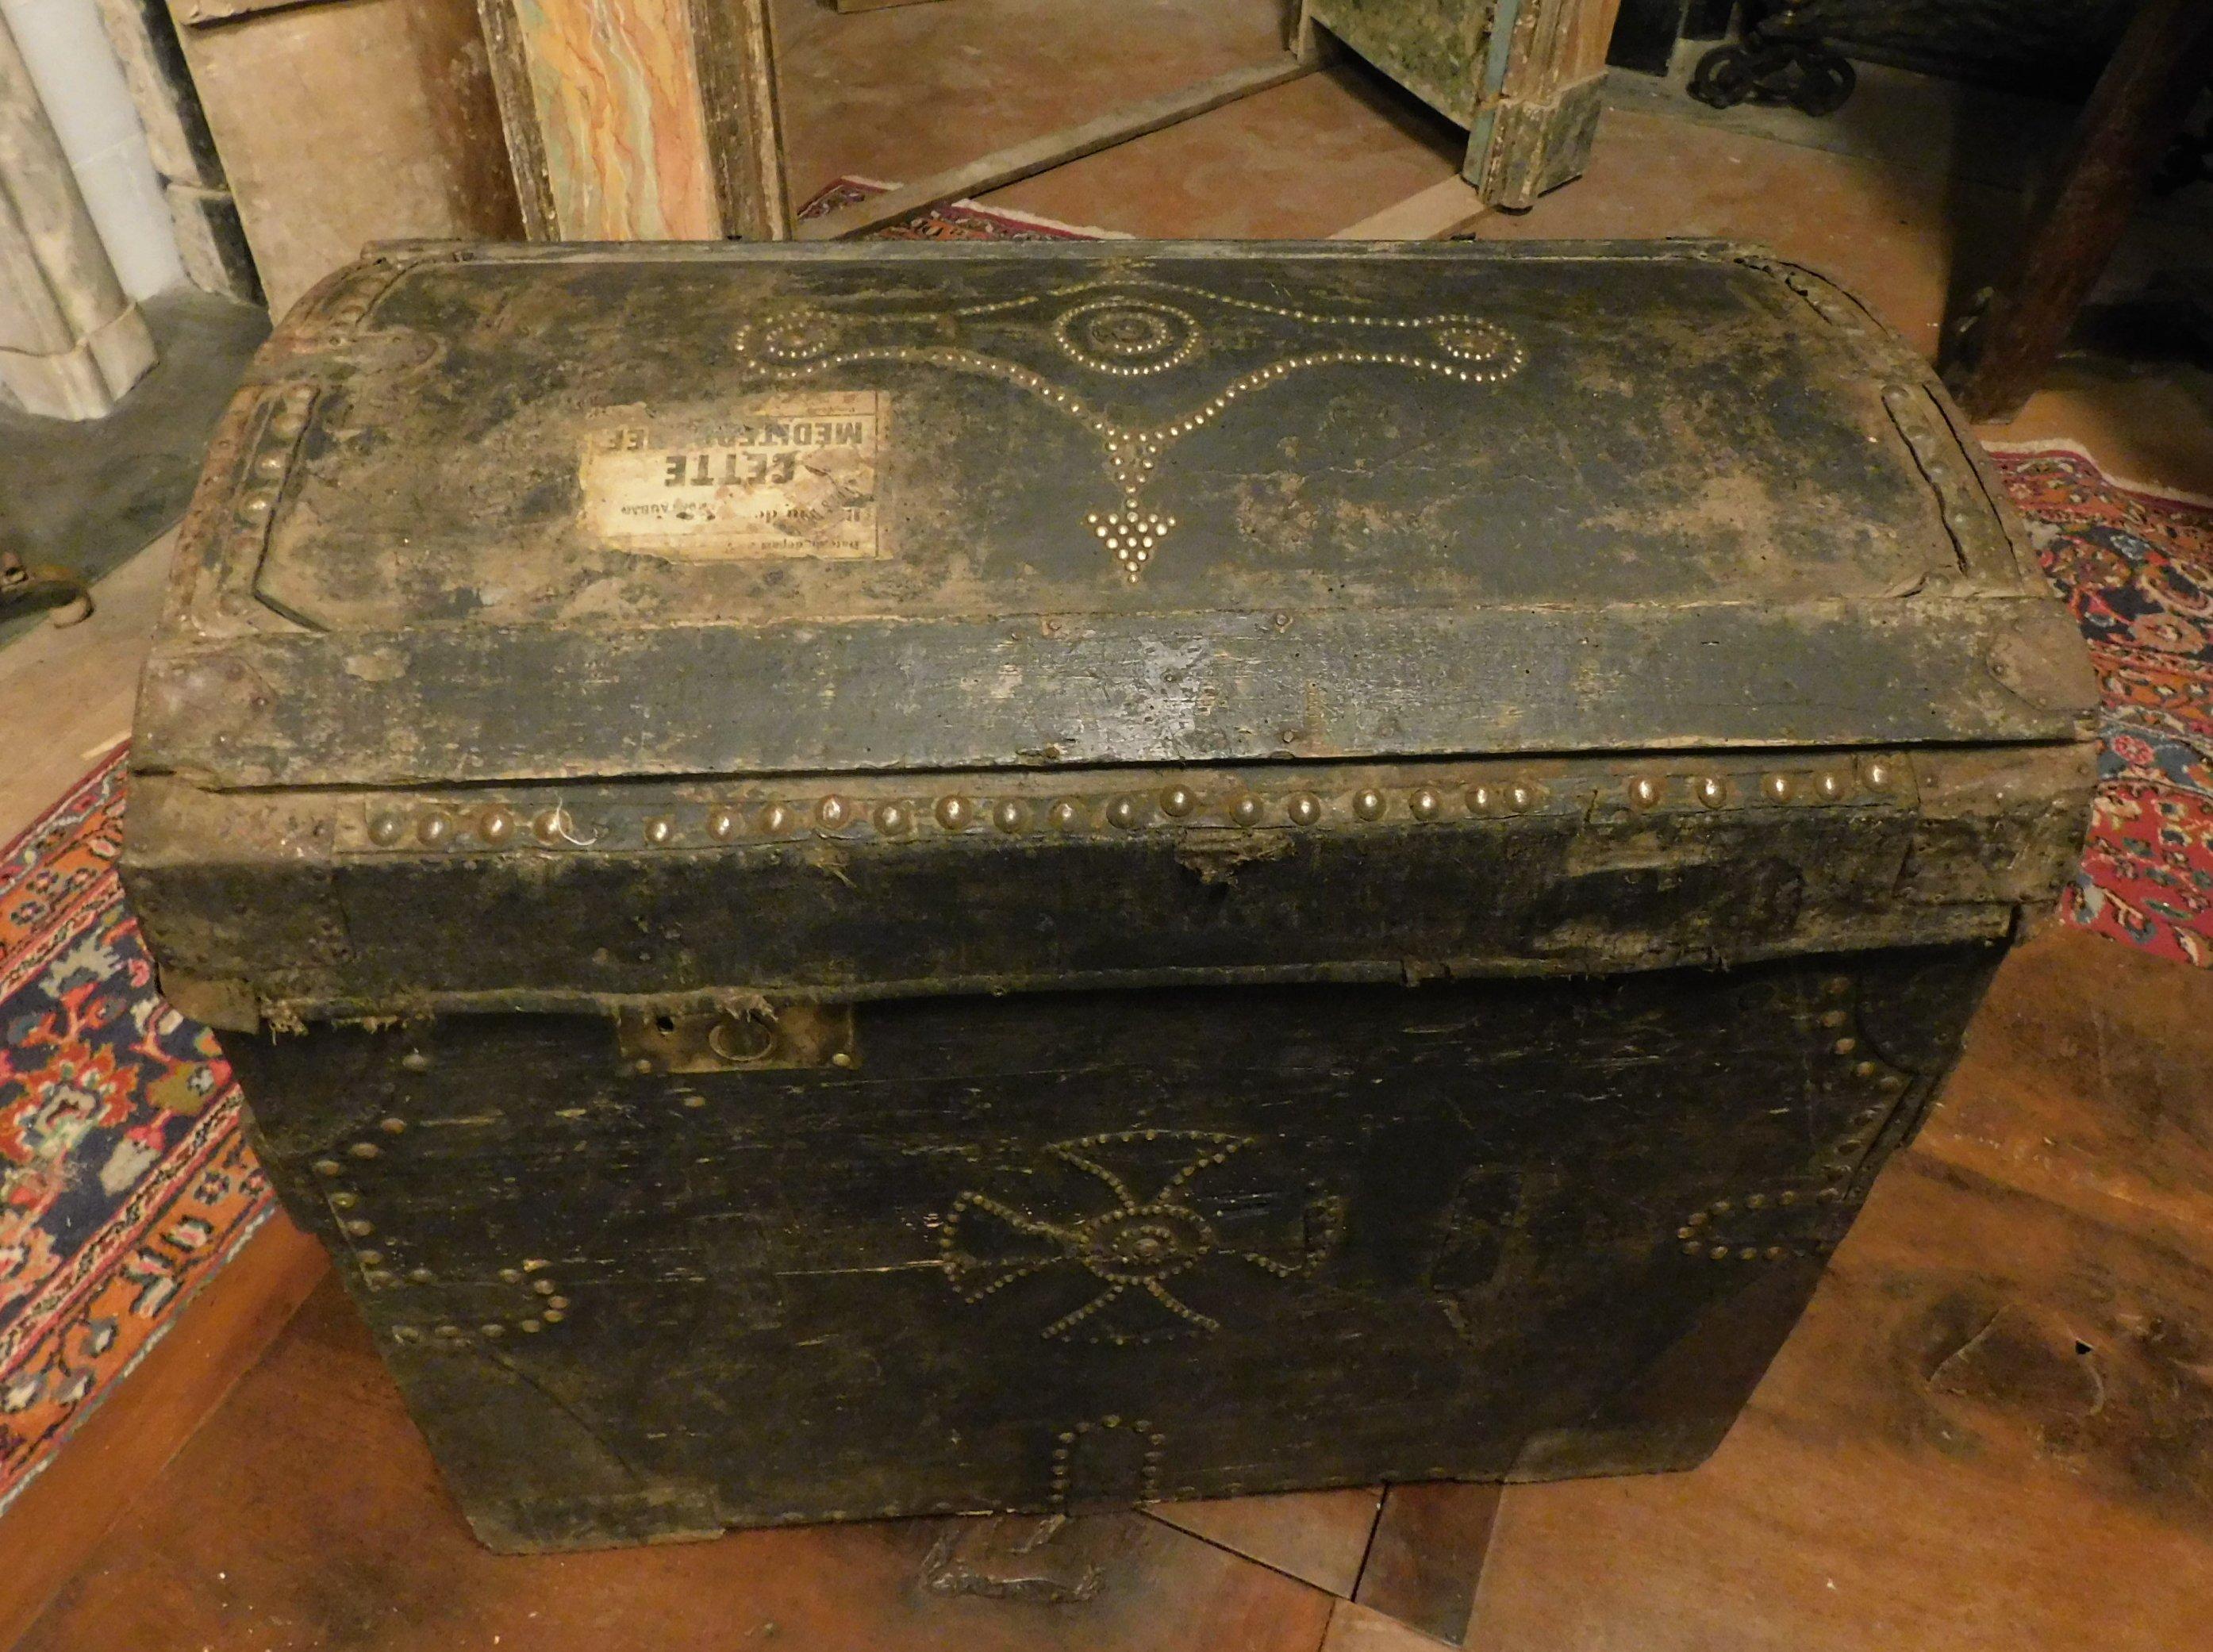 19th century antique and rare lacquered trunk, with decorations in studs, early 1800s,
used for guns or wears. Original from Italian Castle.
Wide measure 60 x 49 H 74 cm.